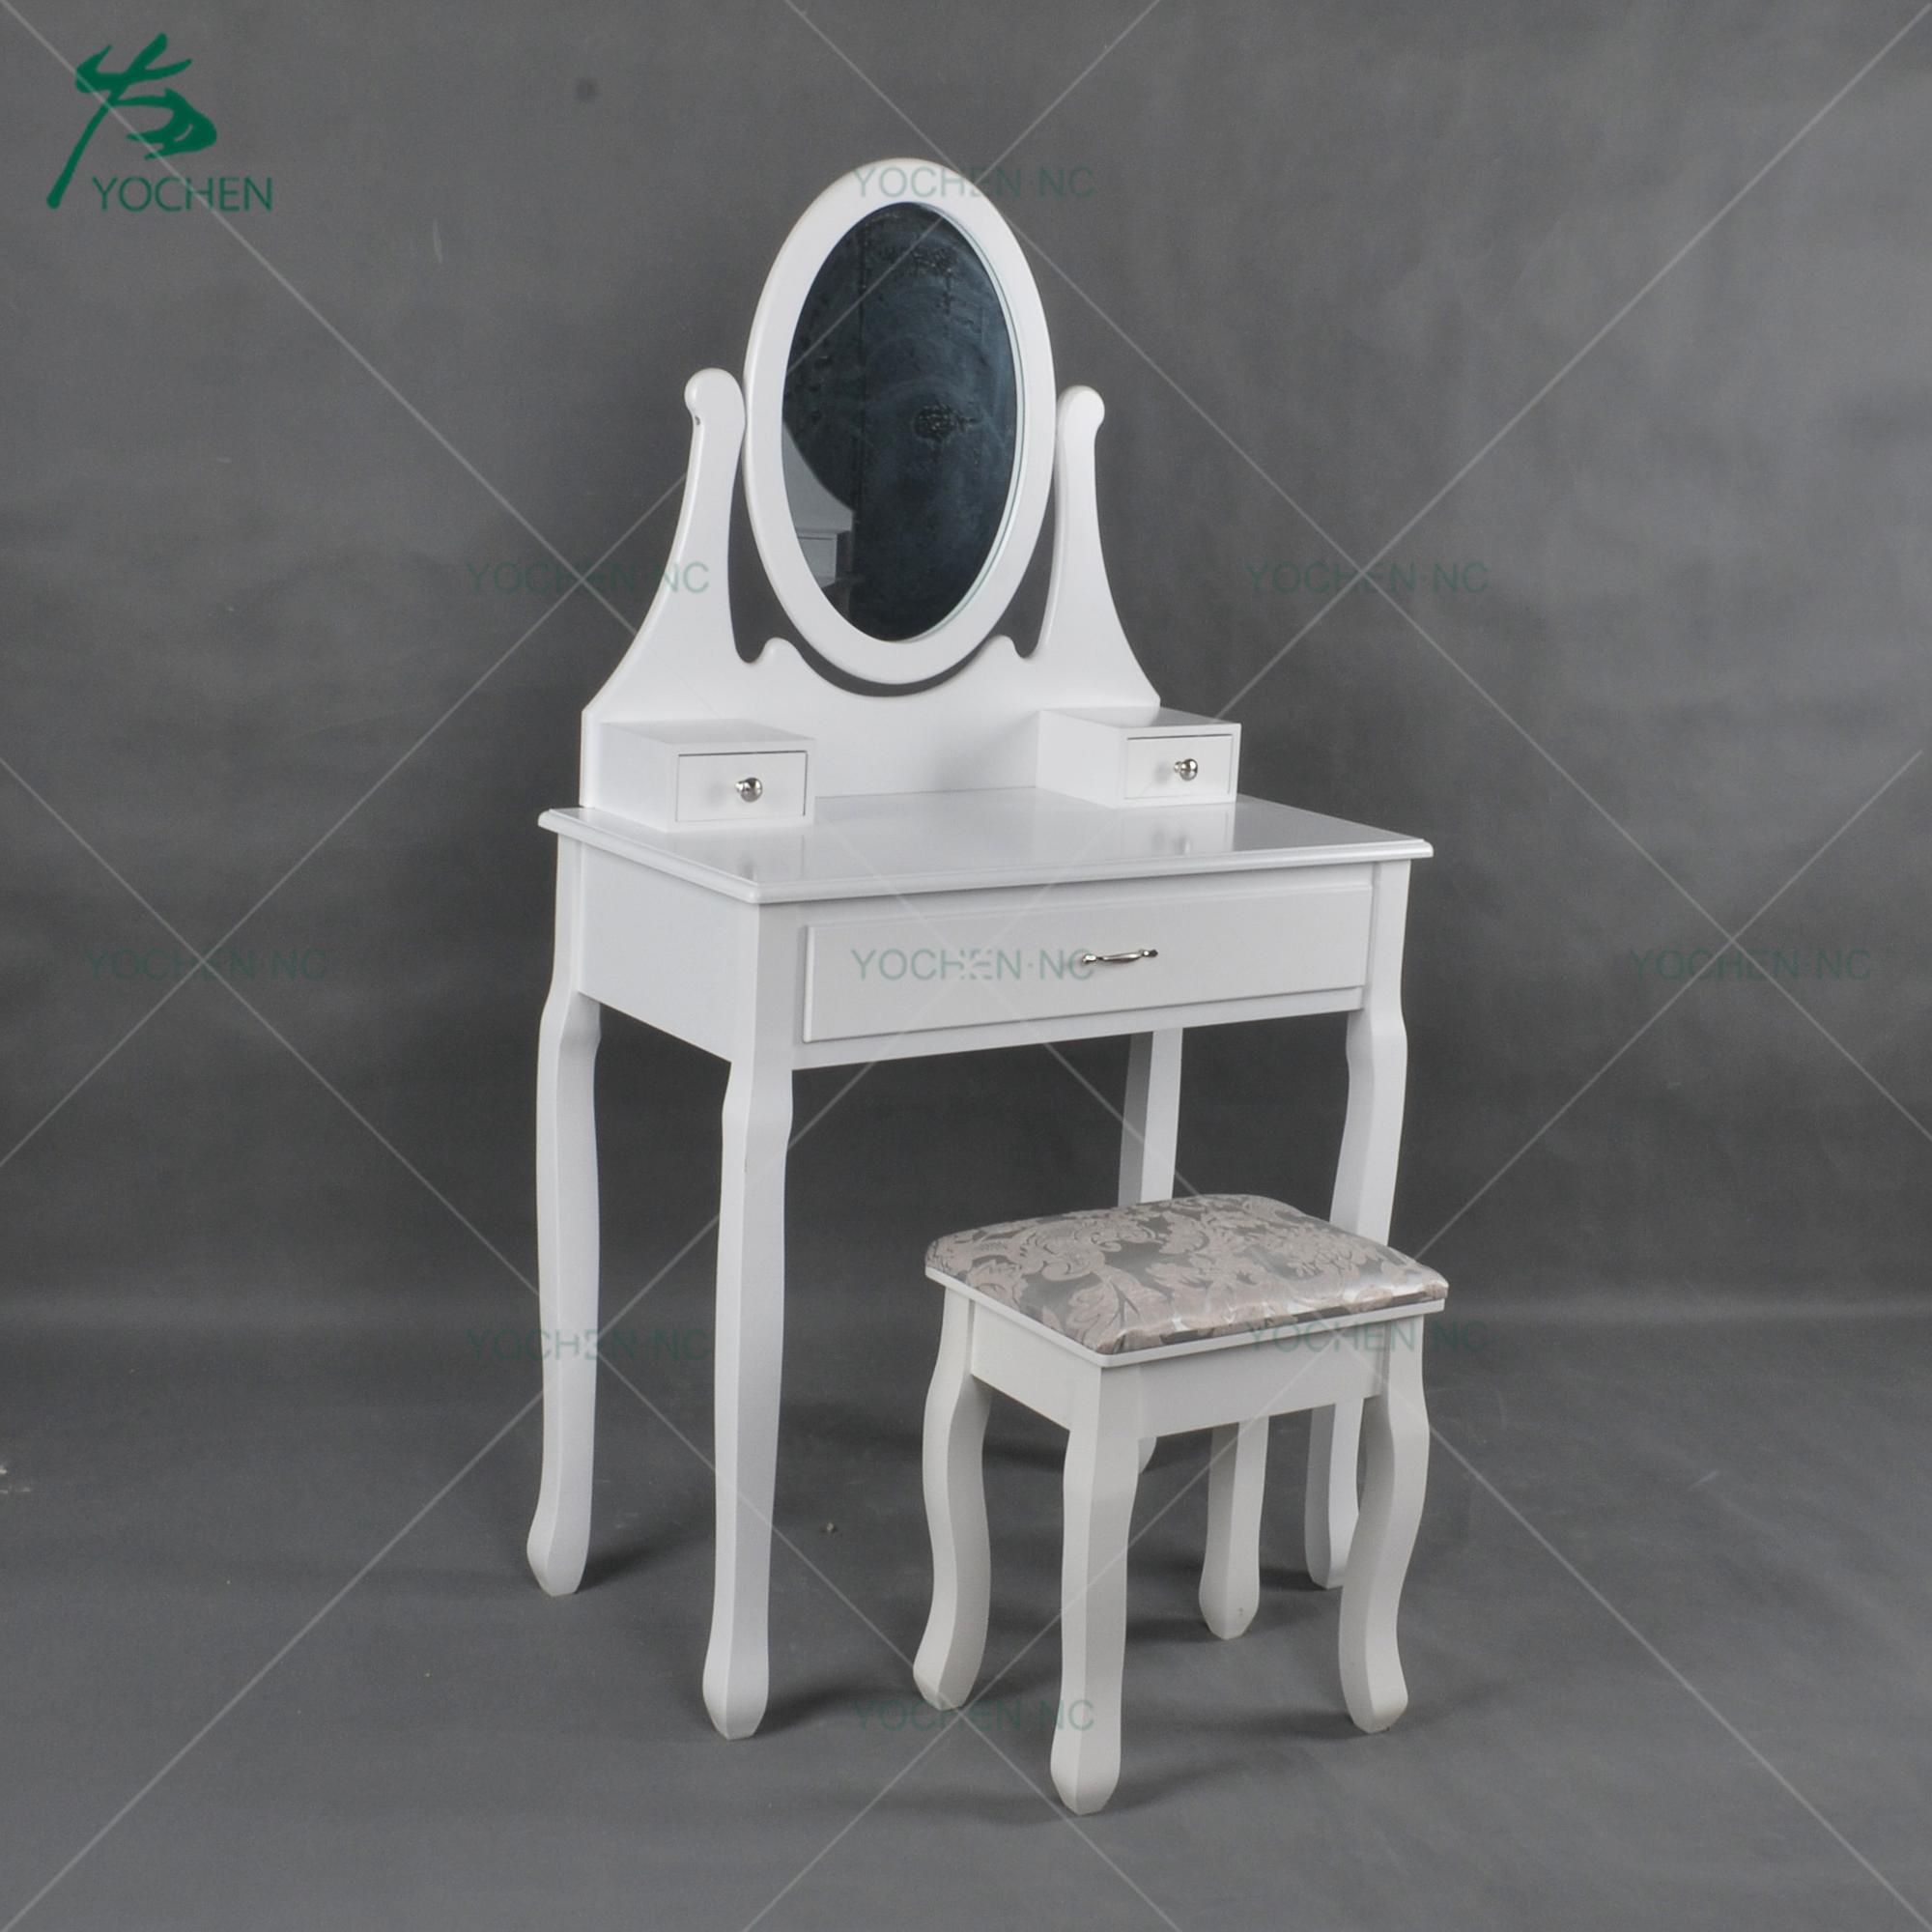 cosmetic simple dressing table design modern